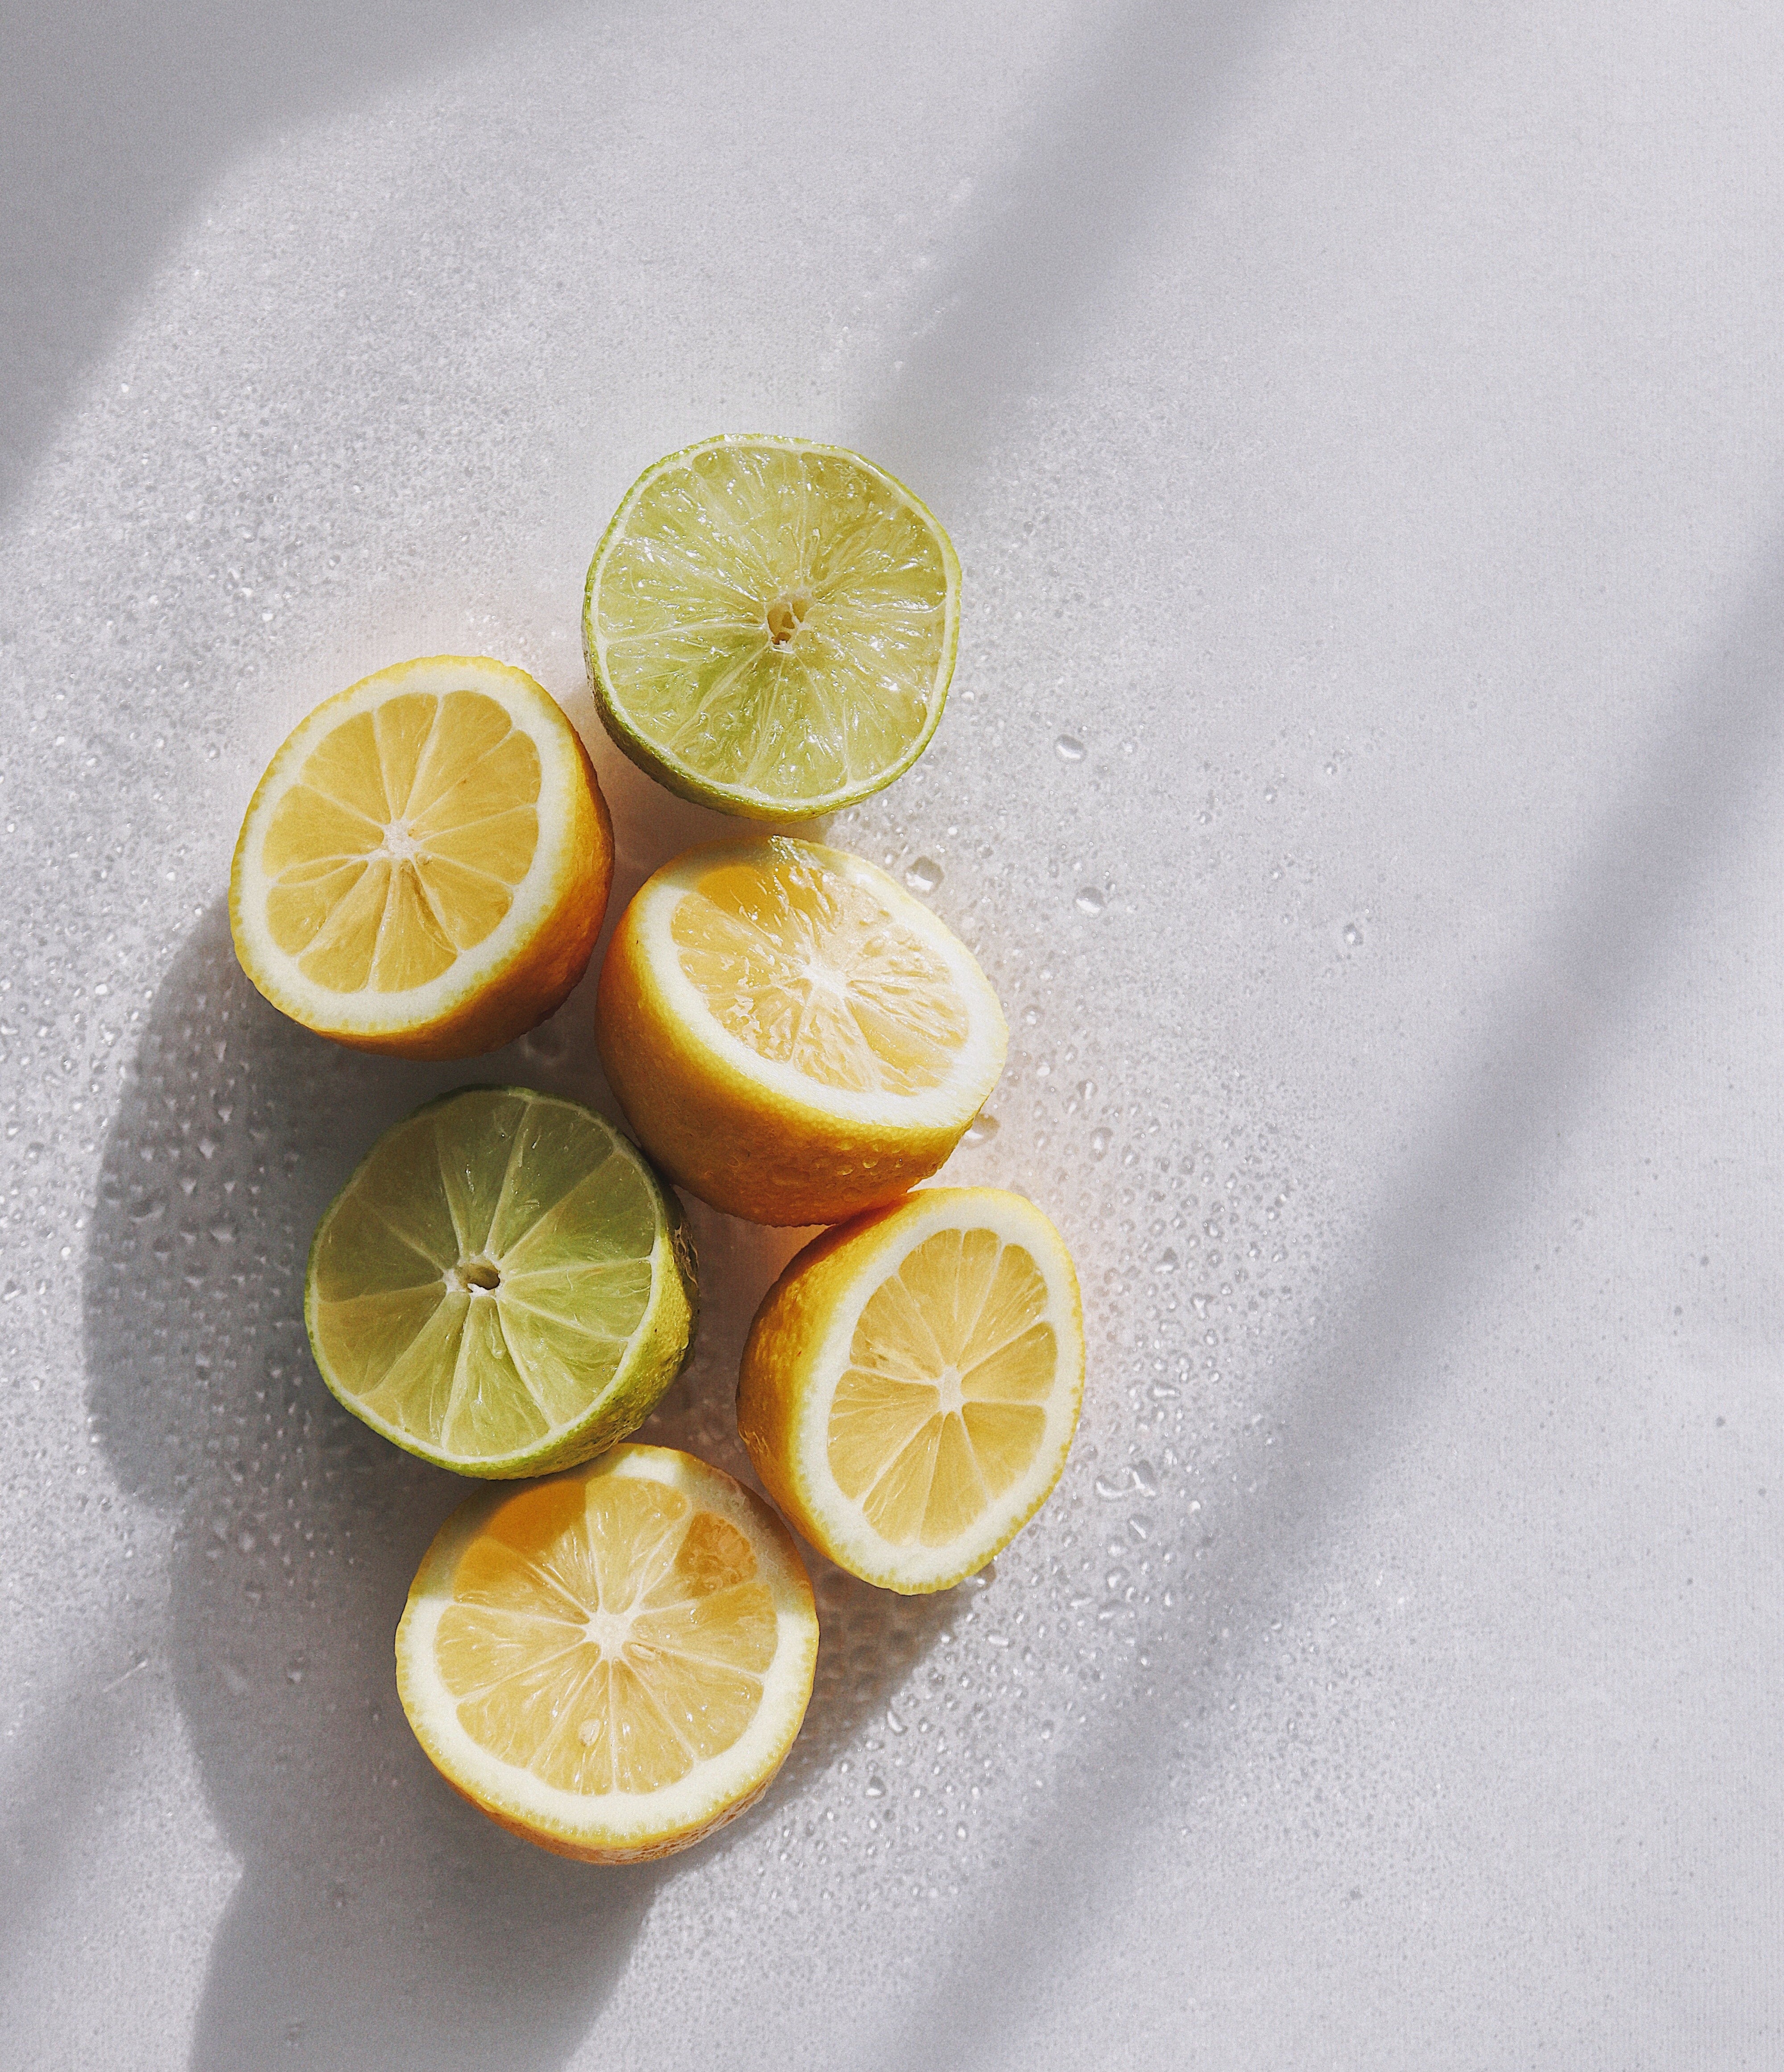 What is bergamot and what does bergamot smell like?